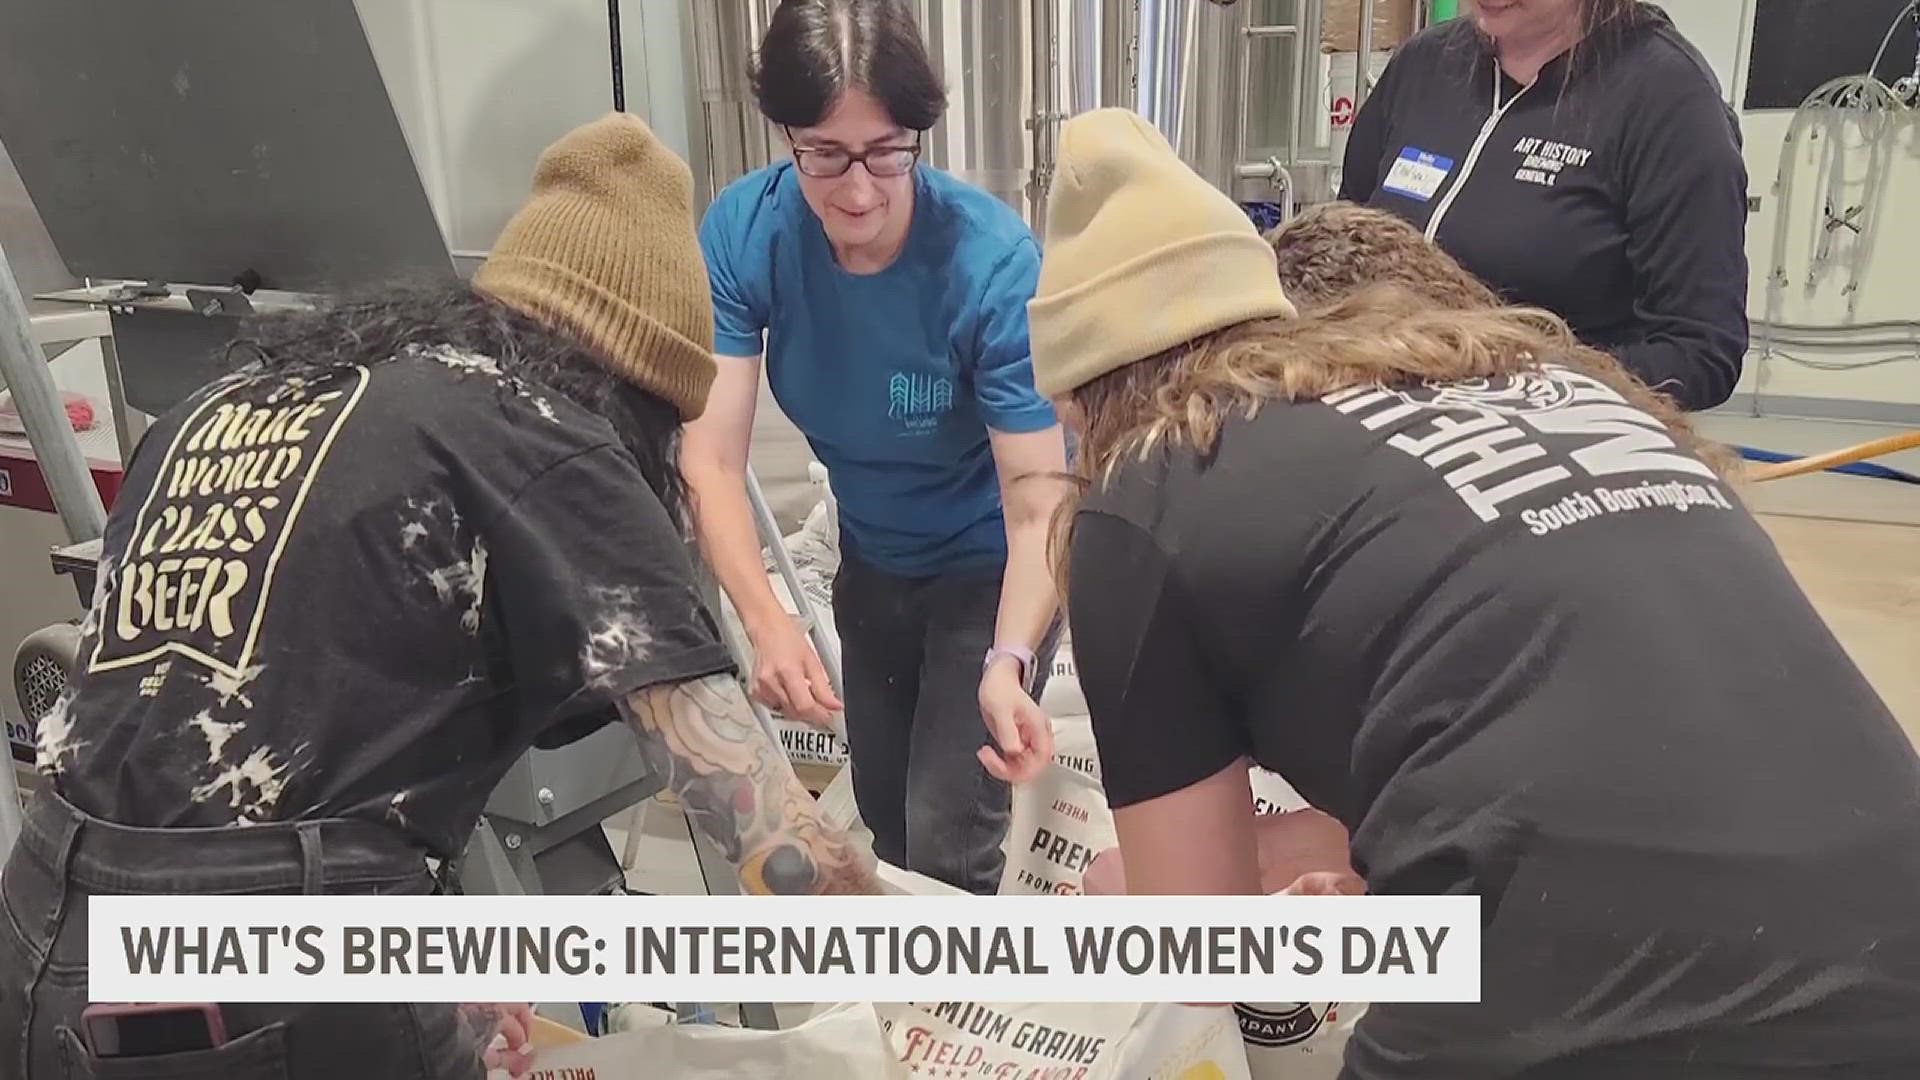 The Brew Crew hits the road to visit Bearded Owl Brewery in Peoria, where they have two unique beers prepared to kick off the International Women's Day celebration.